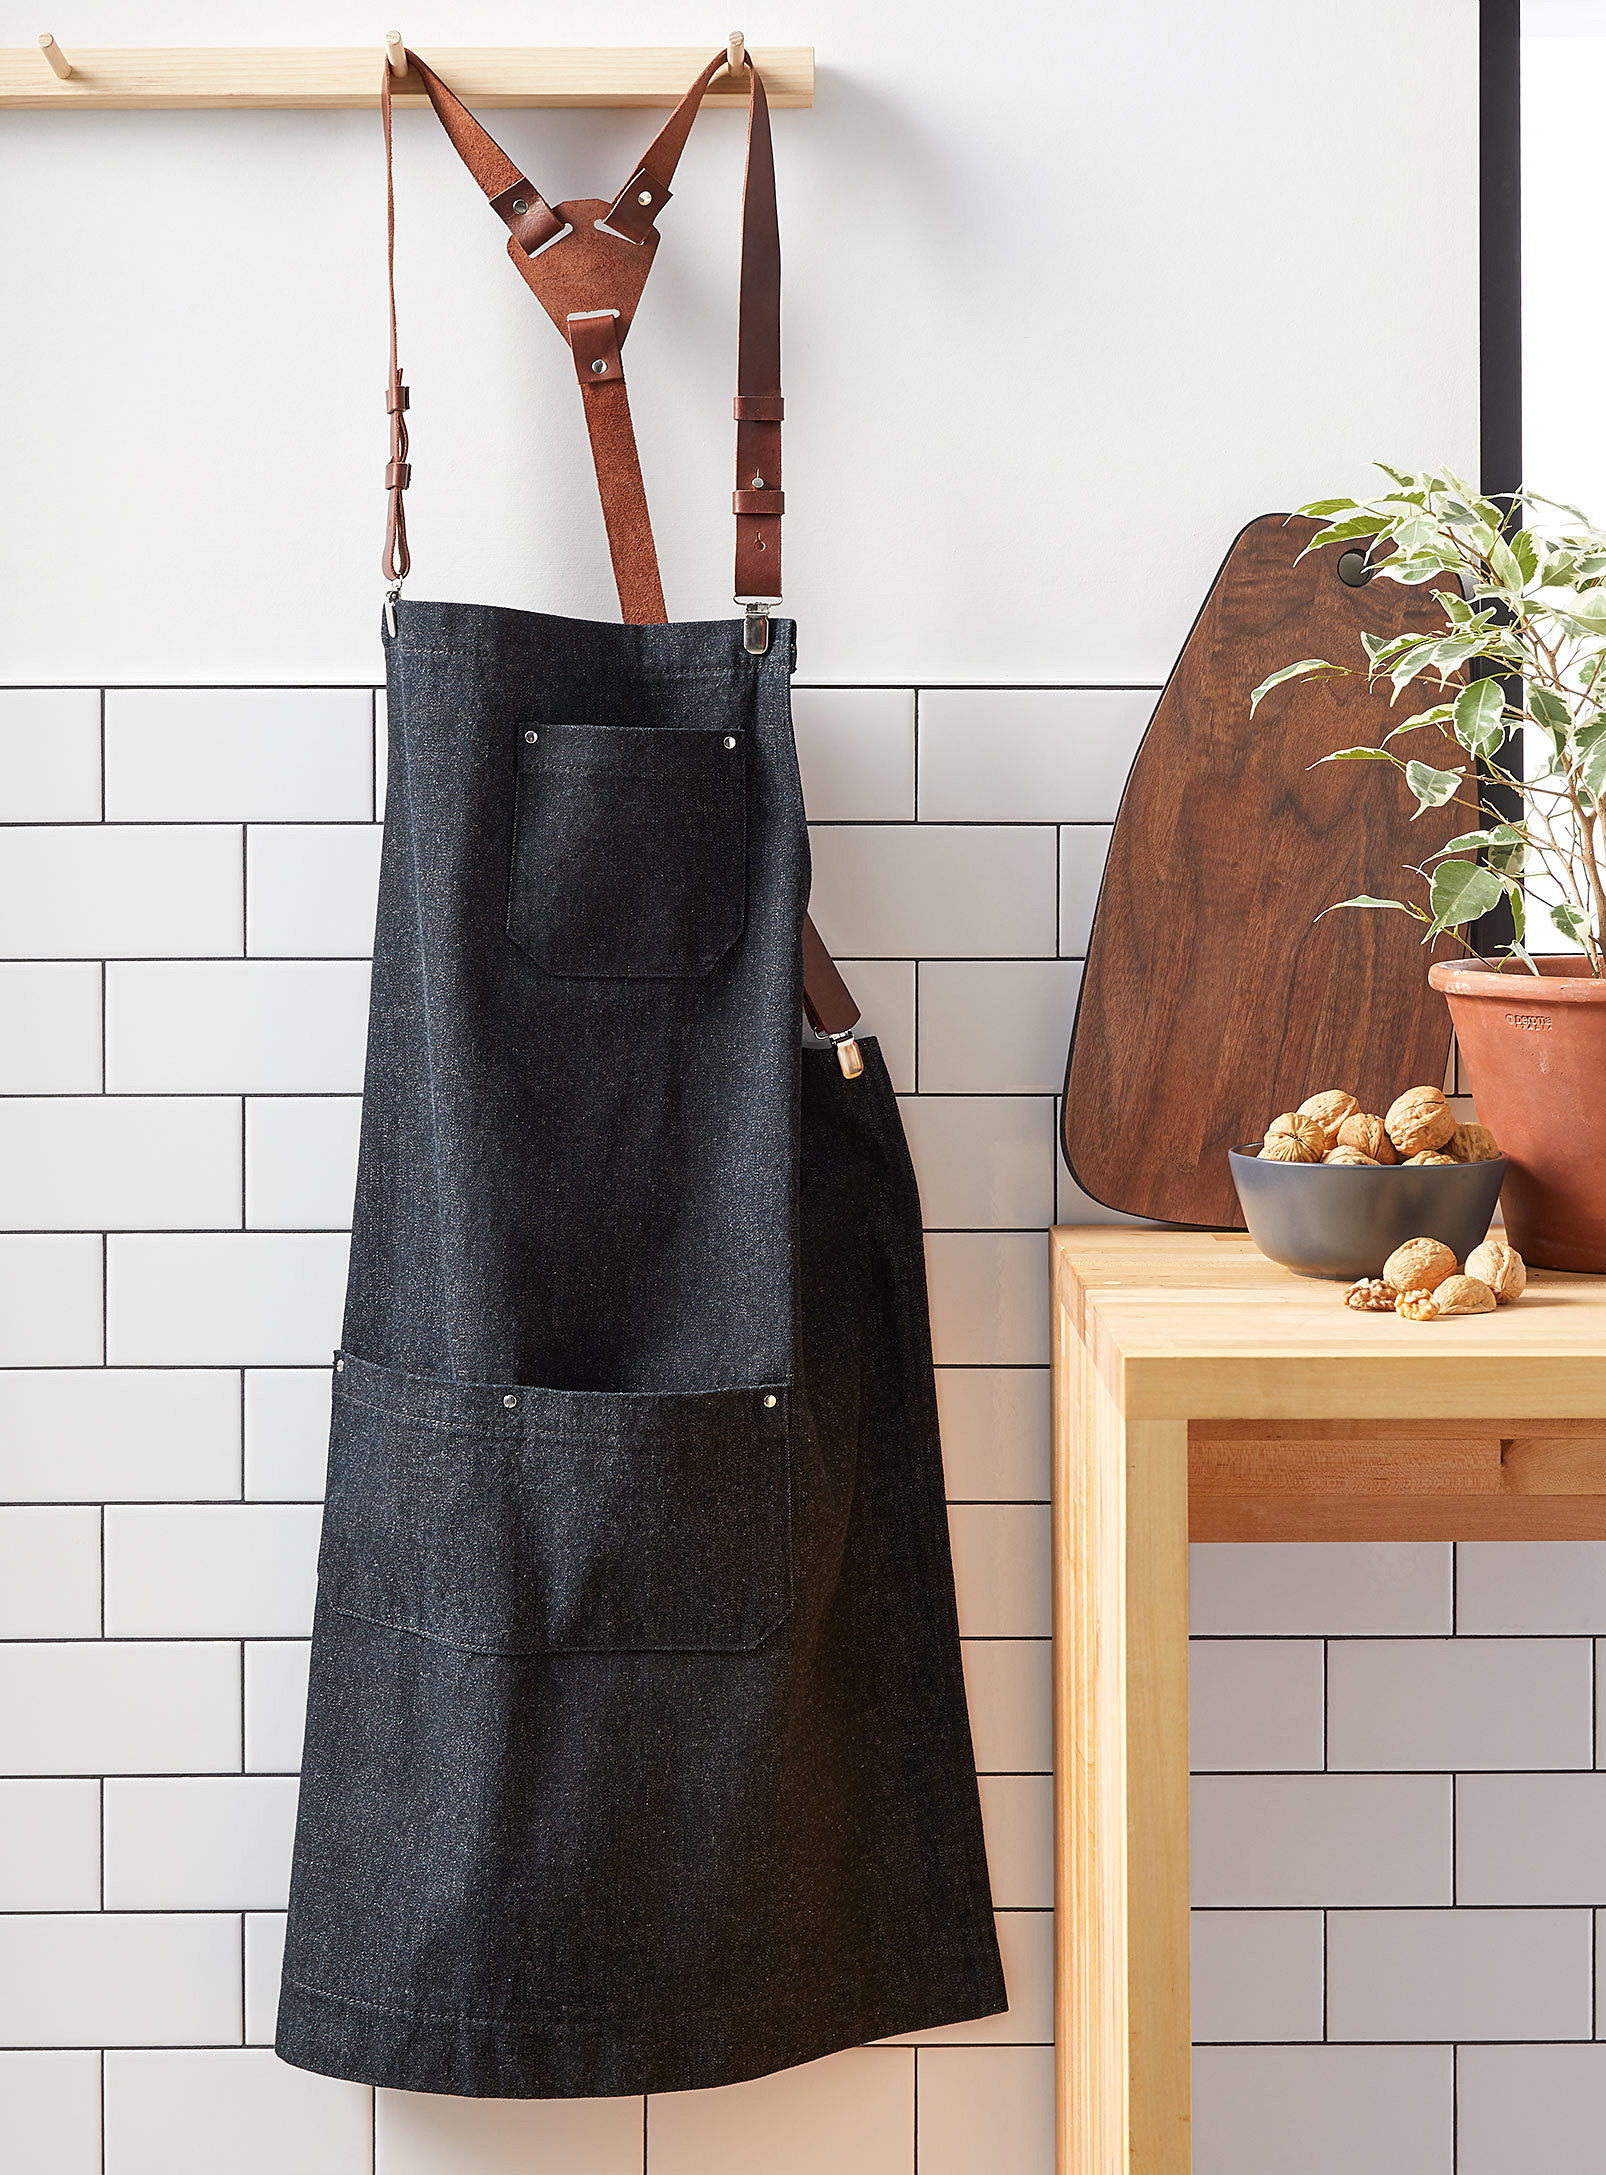 Atelier Chalet - Denim and leather apron